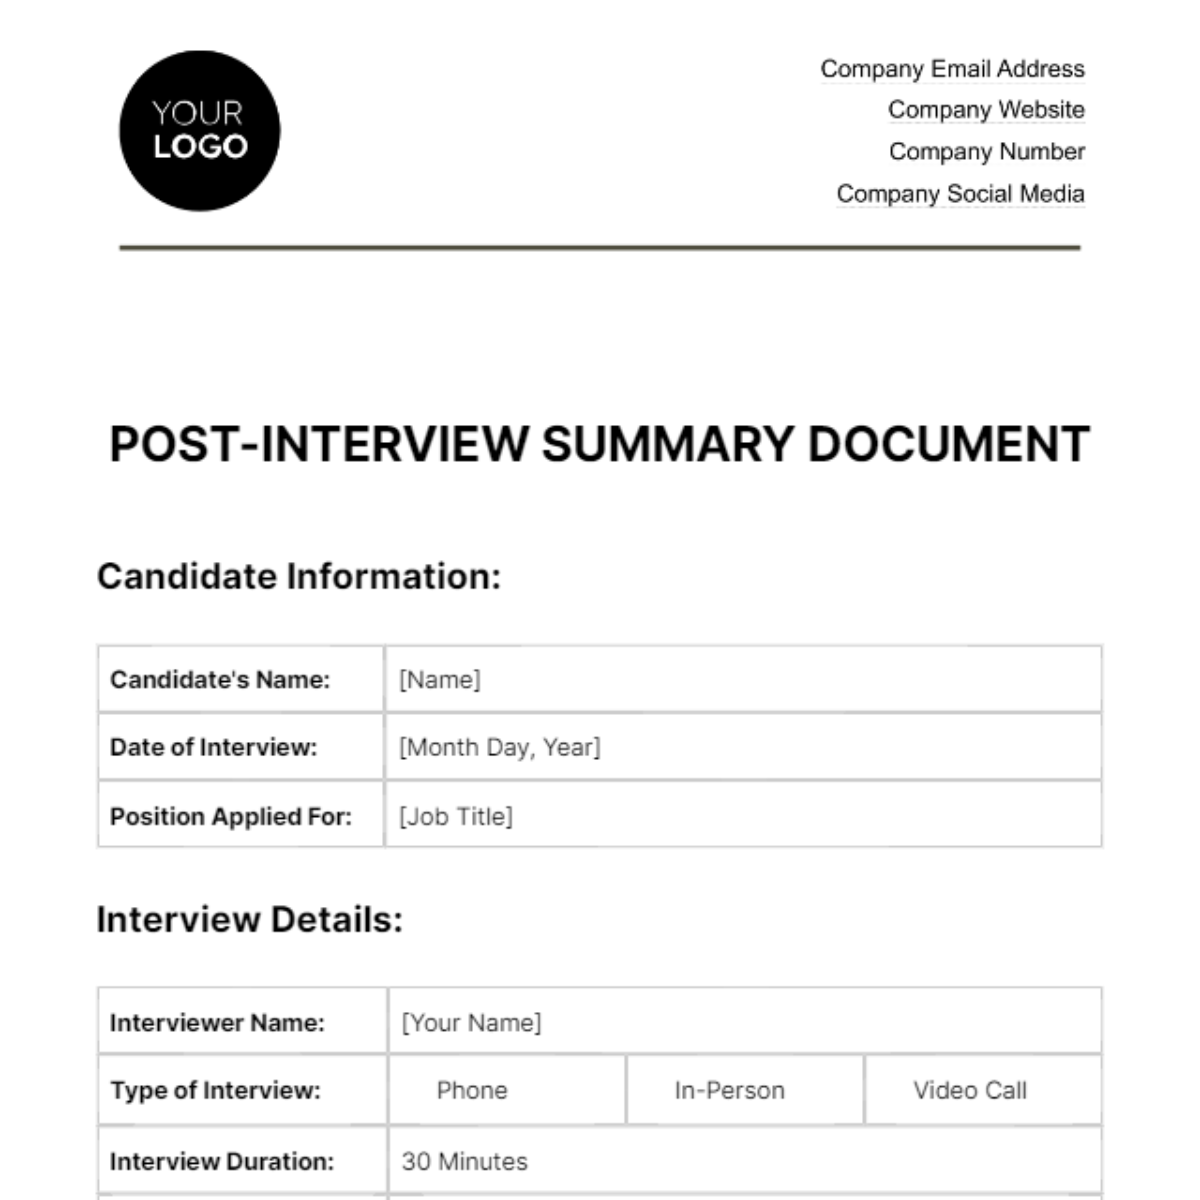 Post-Interview Summary Document HR Template